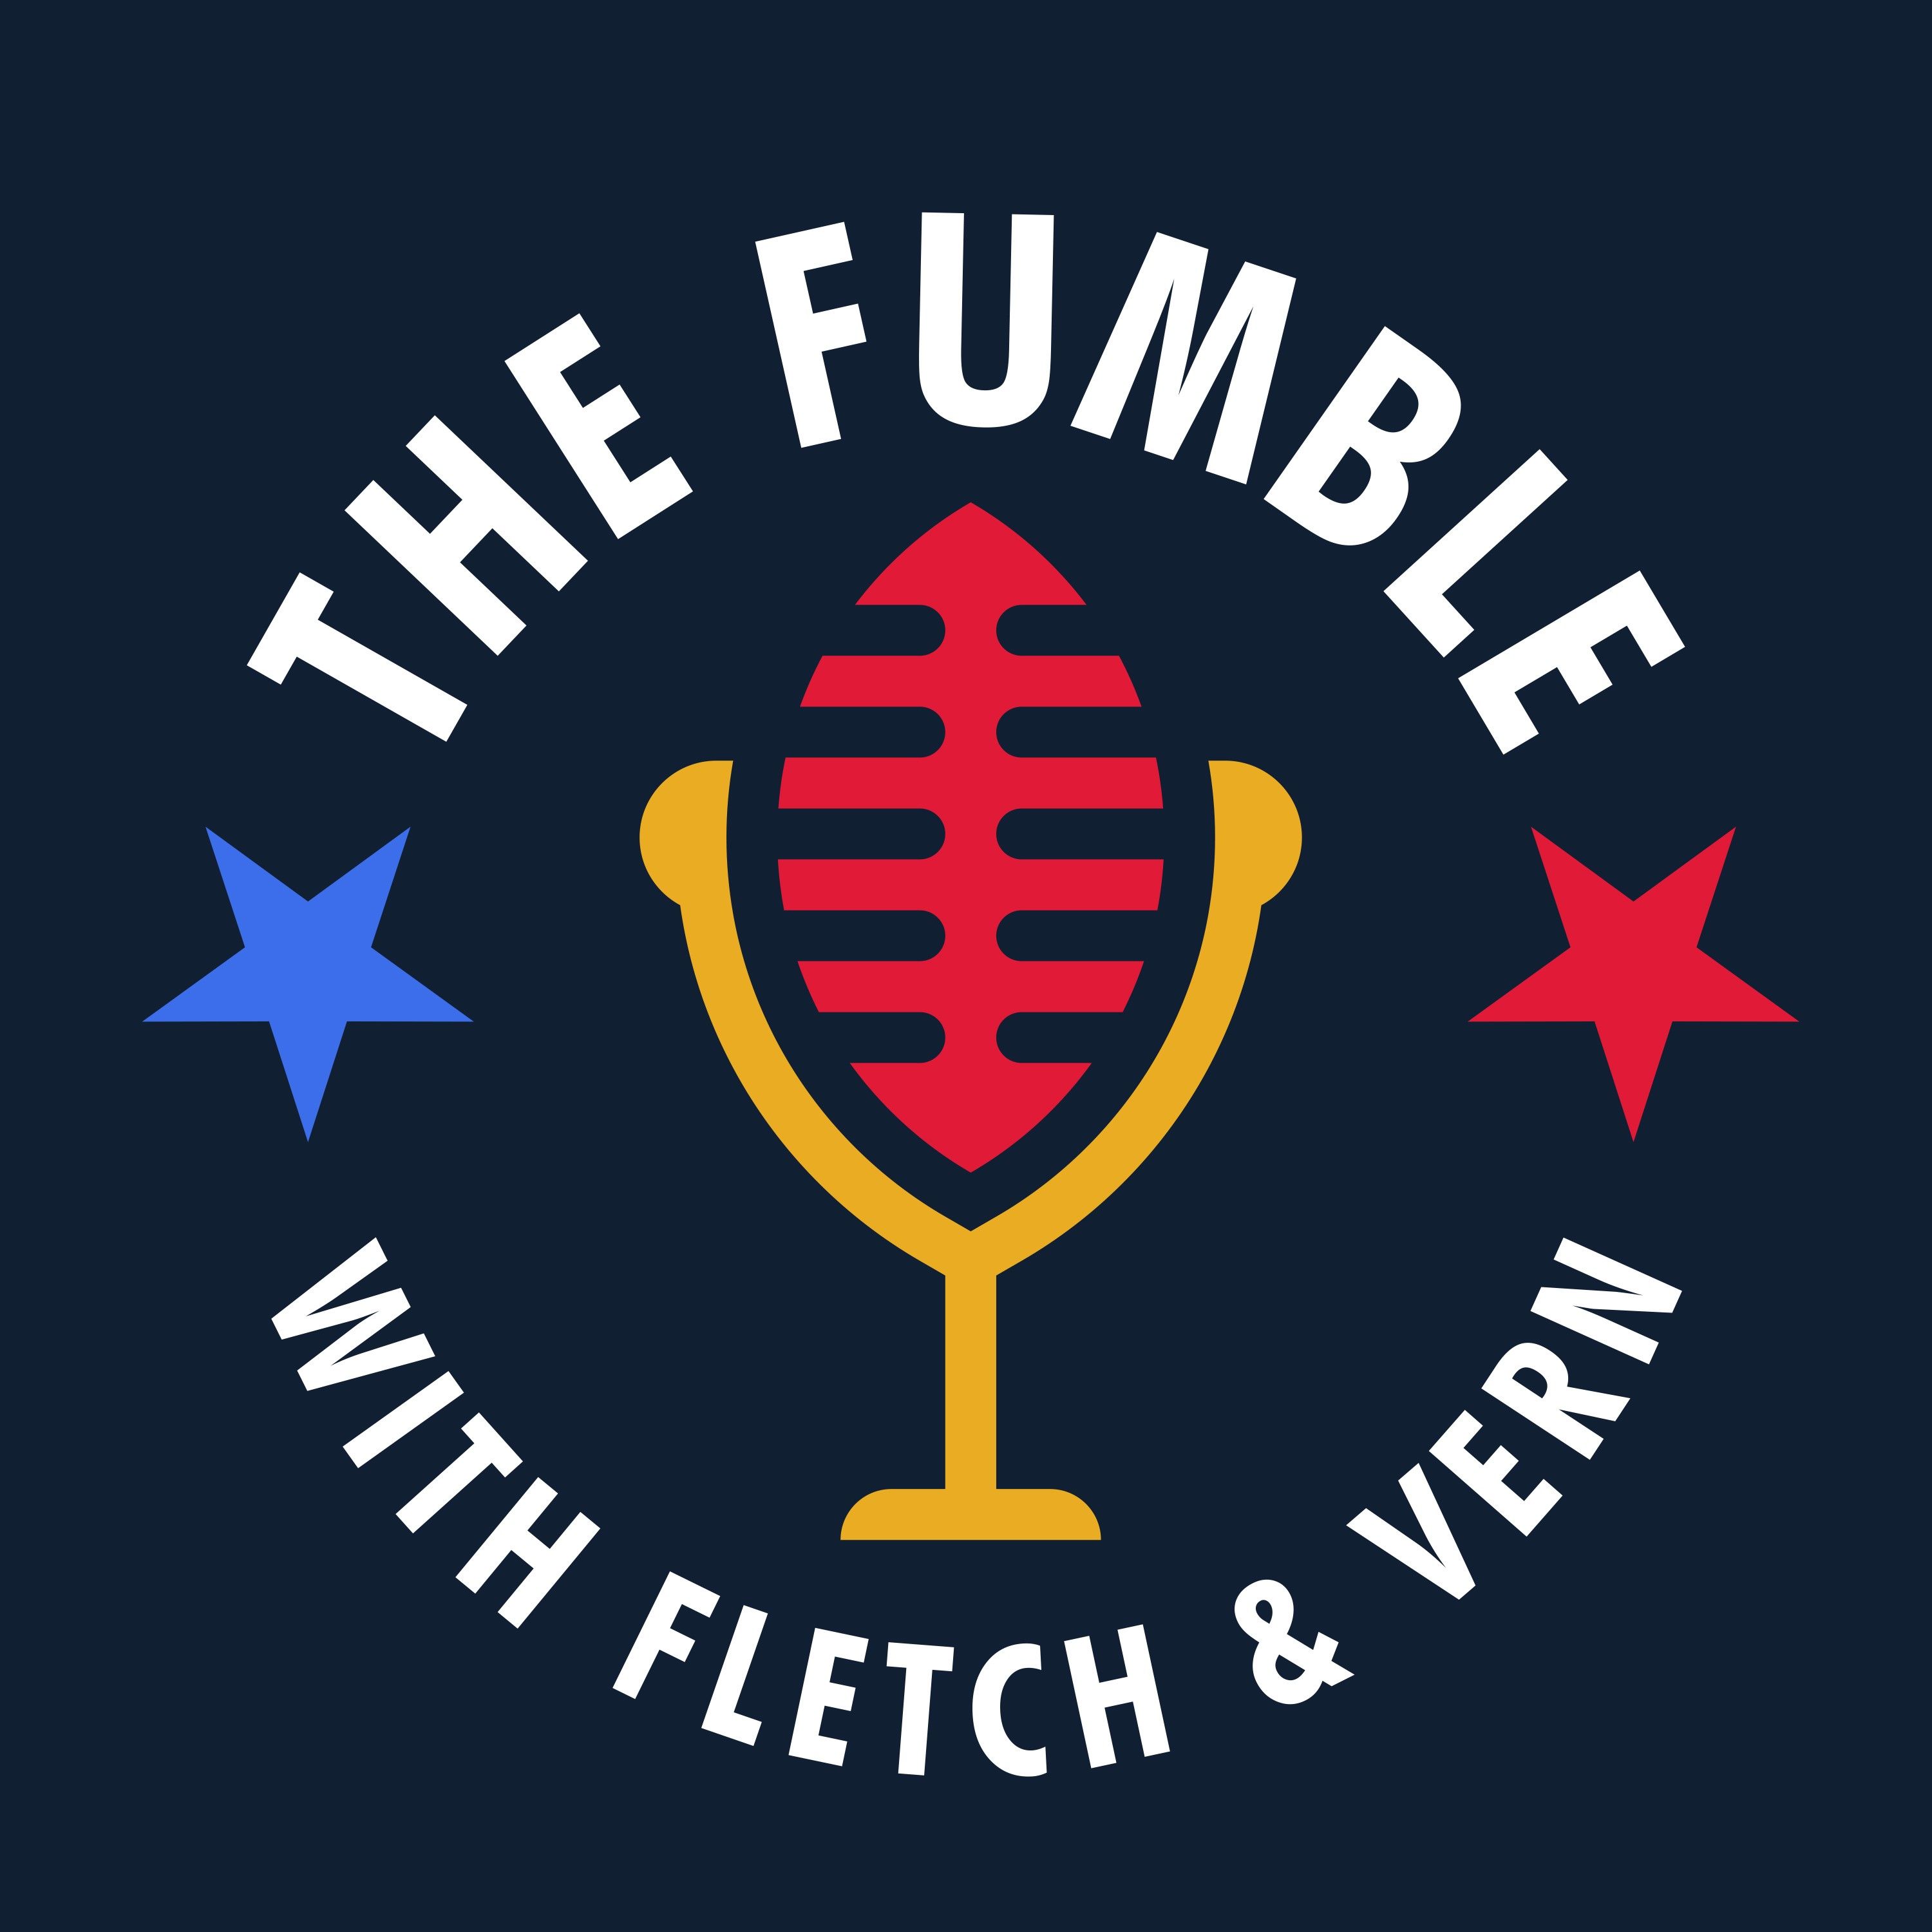 THE FUMBLE with FLETCH & VERN S4E9 TITANS, PACKERS & MONDAY NIGHT FOOTBALL